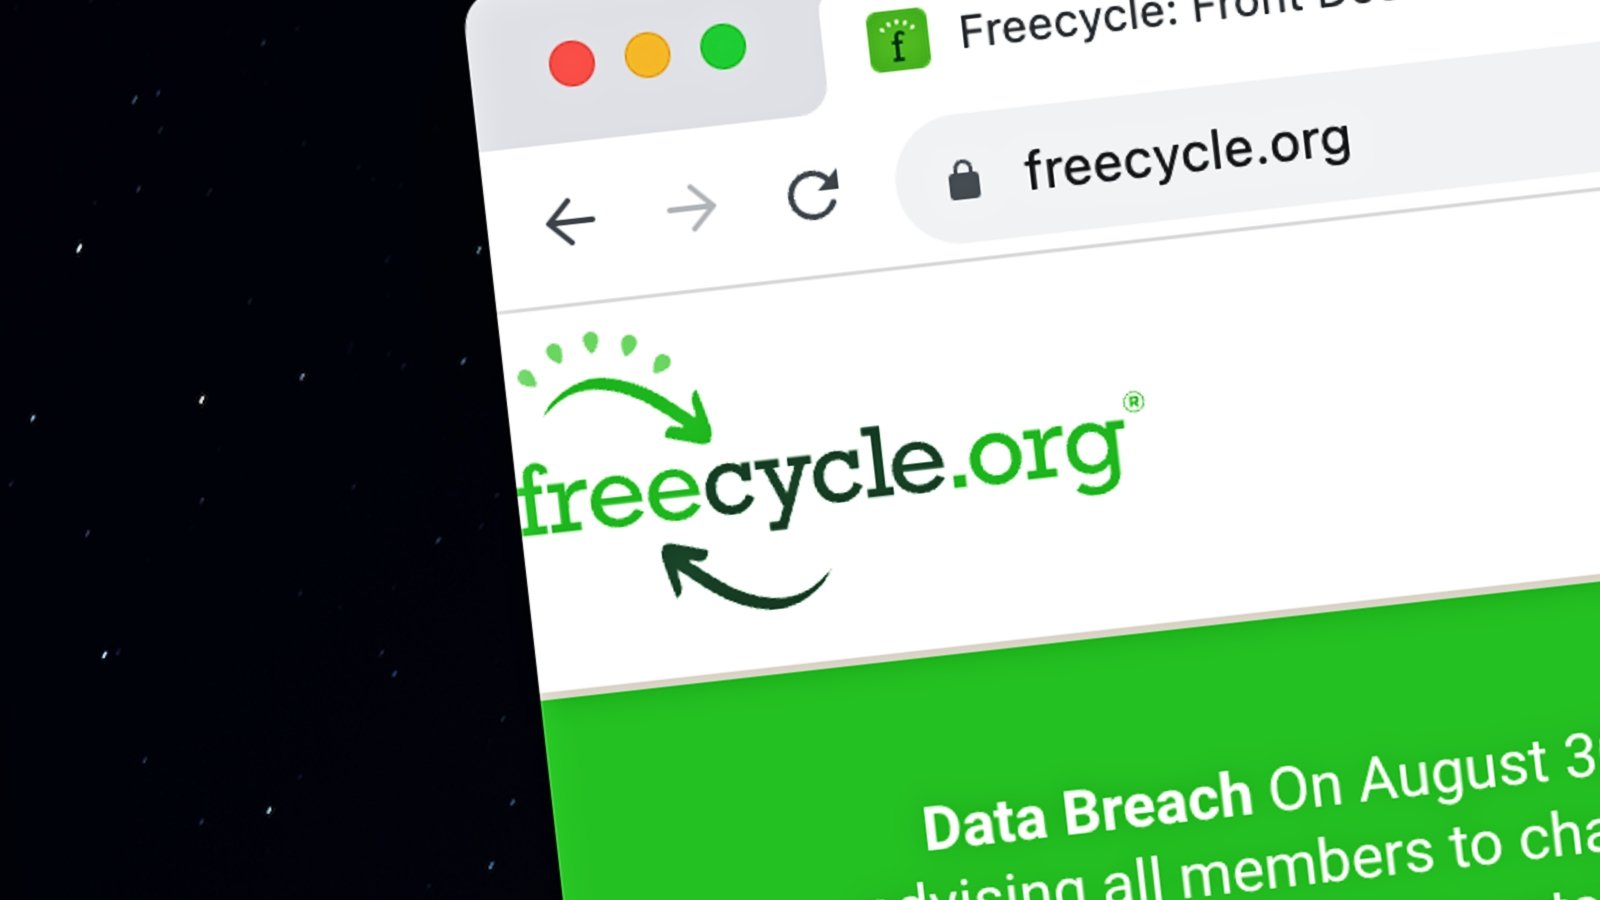 Freecycle confirms massive data breach impacting 7 million users – Source: www.bleepingcomputer.com